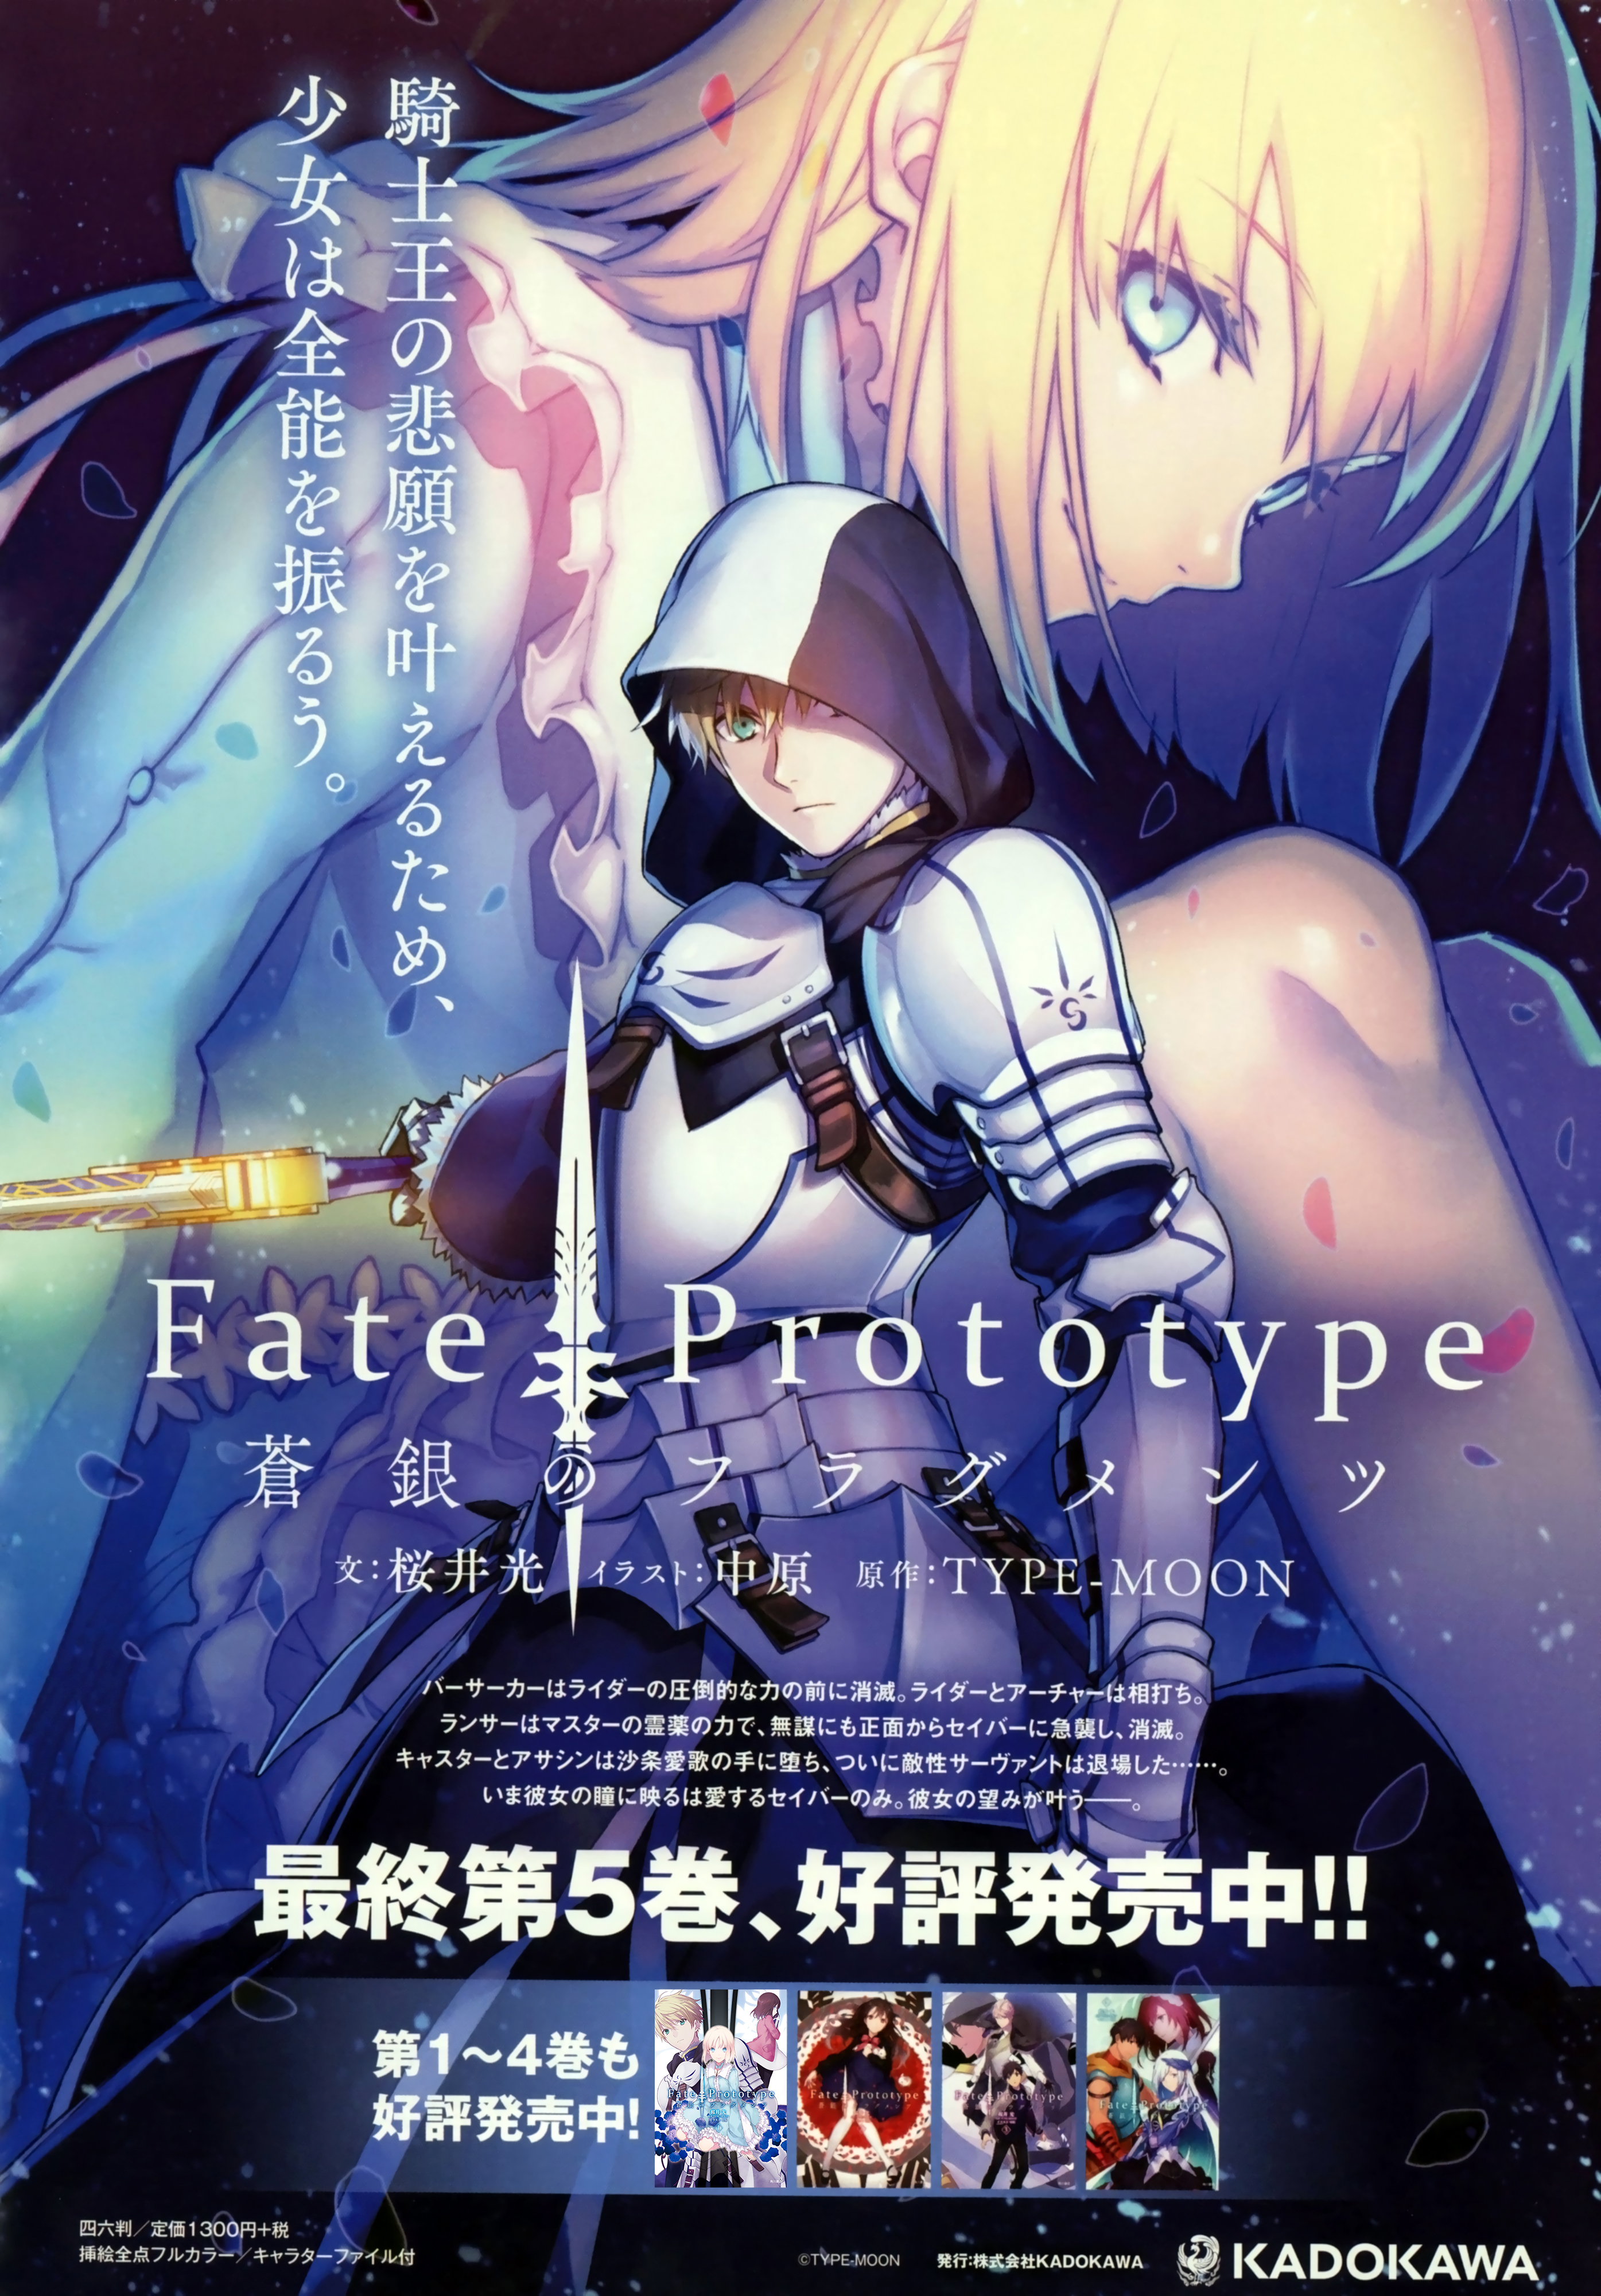 Type Moon Fate Prototype Fate Prototype Fragments Of Blue And Silver Fate Stay Night Archer Fate Prototype Fragments Berserker Fate Prototype Fragments Lancer Fate Prototype Fragments Nigel Sayward Reiroukan Misaya Rider Fate Prototype